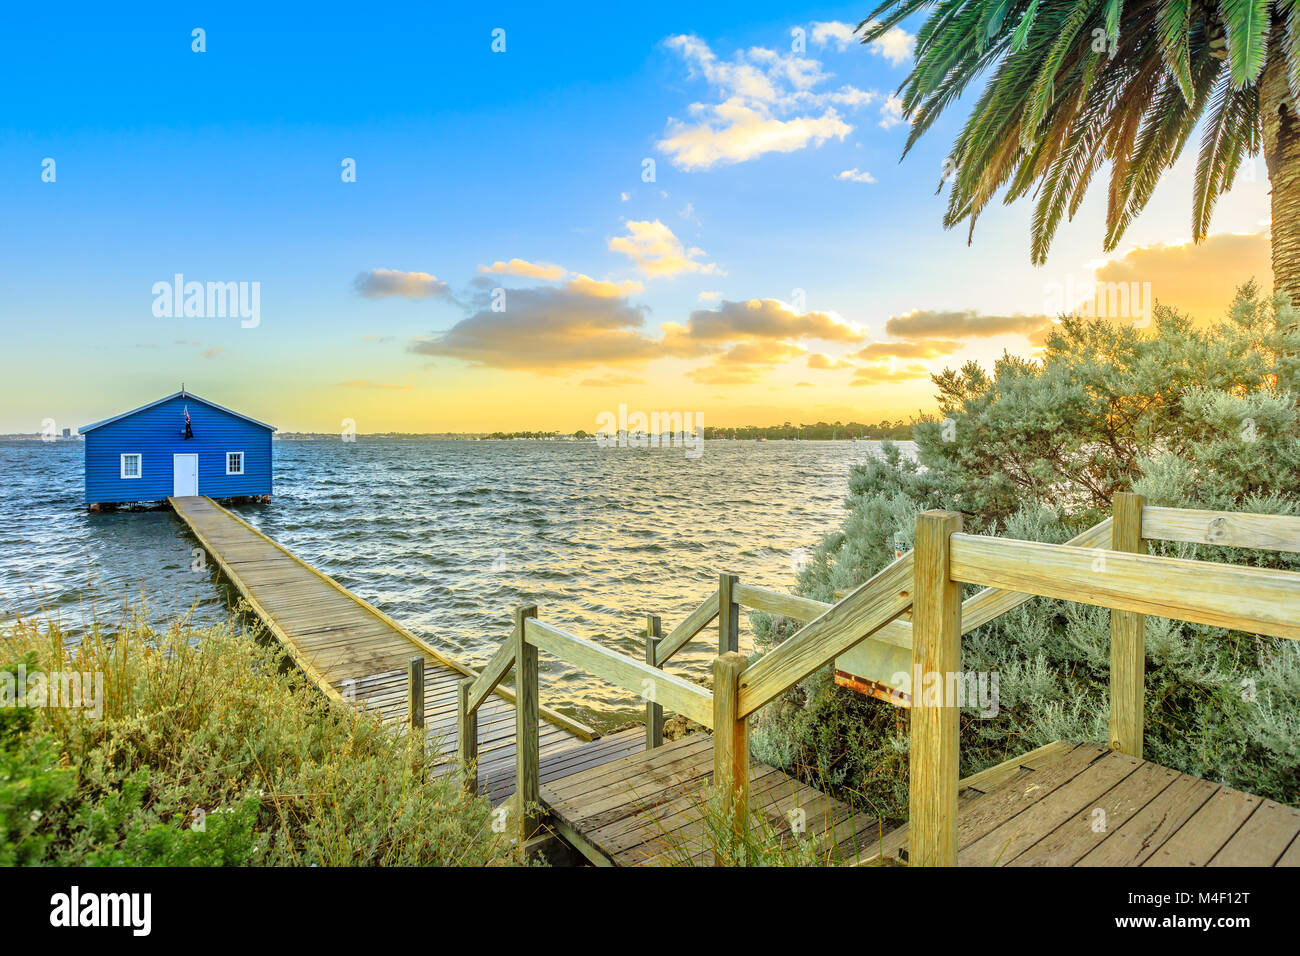 The iconic landscape of blue boat house from 1930s with wooden jetty on Swan River at sunset light. One of the most photographed locations in Perth, Western Australia, near Kings Park. Stock Photo